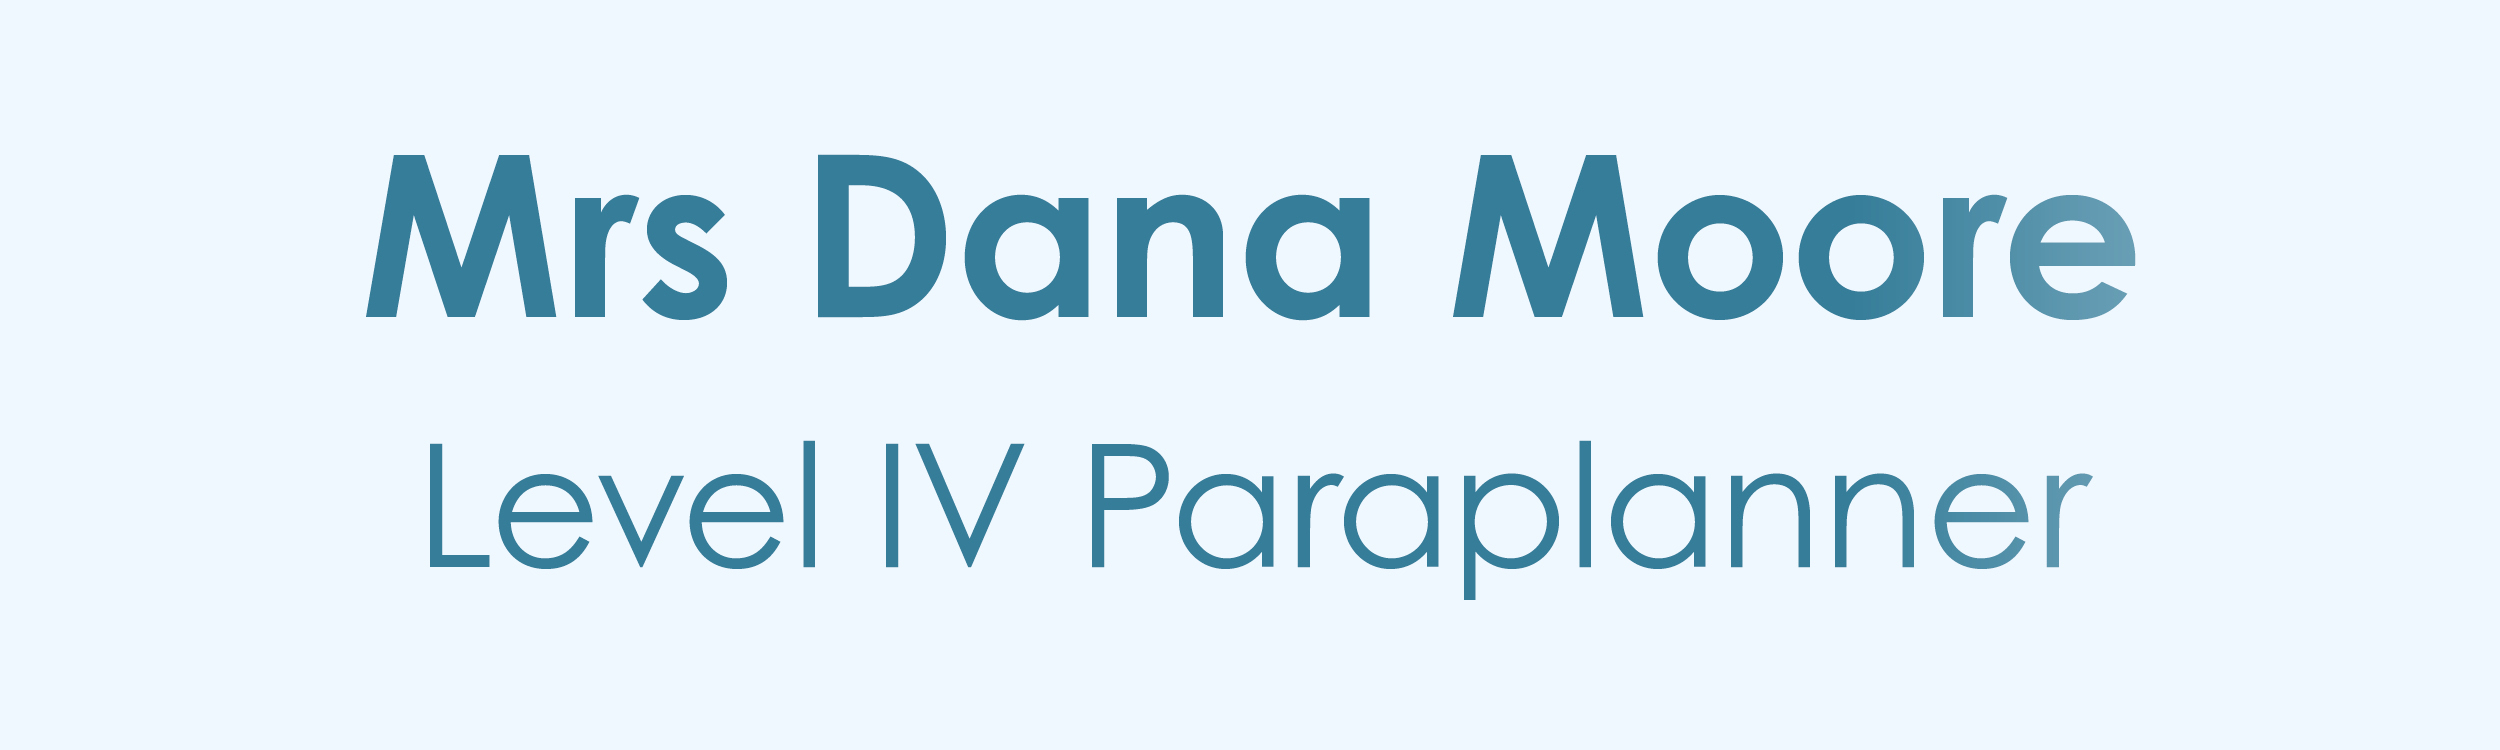 A title plaque for the picture of Mrs Dana Moore, Paraplanner.